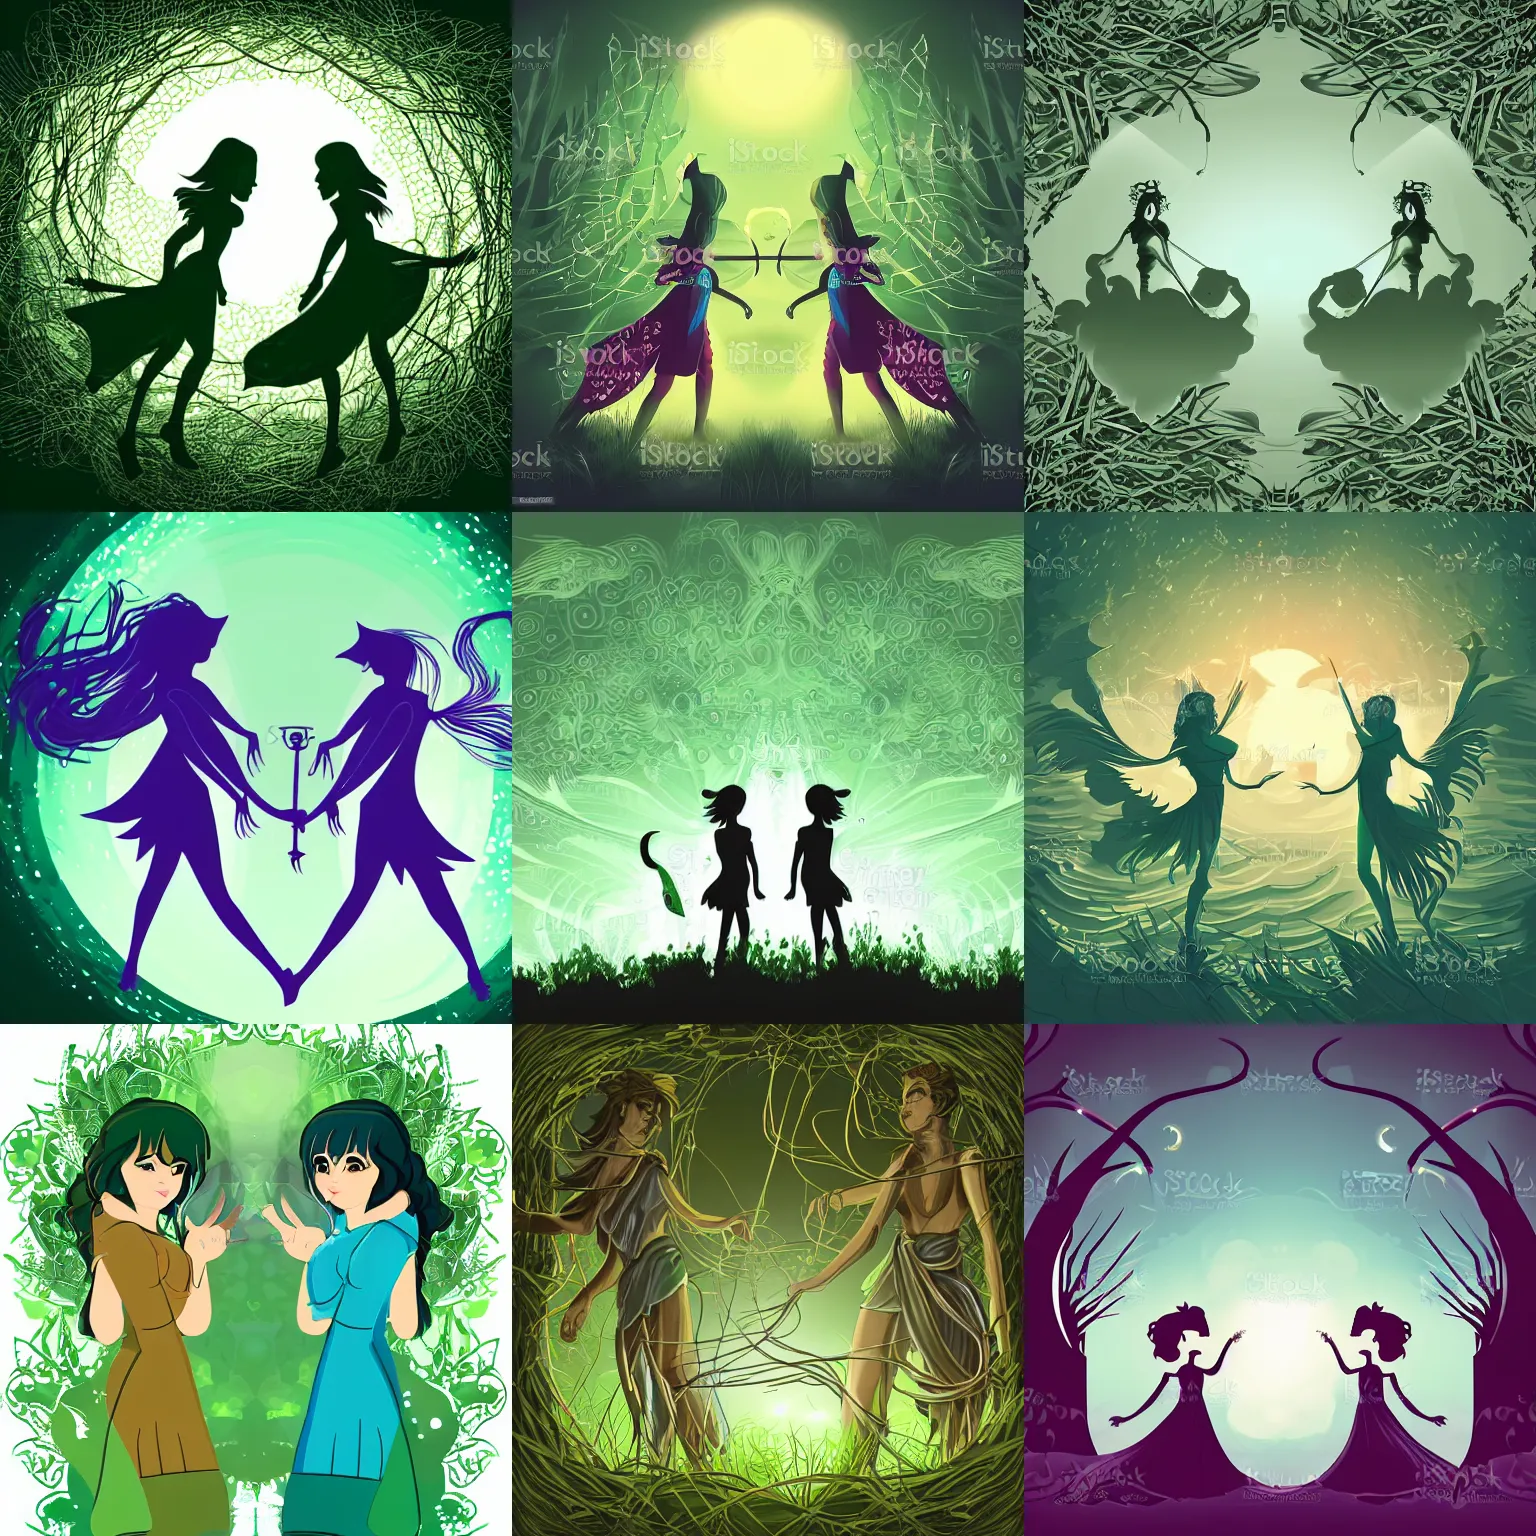 Prompt: closeup, two fantasy spirits are catched by liana, liana entangle two fantasy spirits, in a gentle green dawn light, clean cel shaded vector art. shutterstock. behance hd